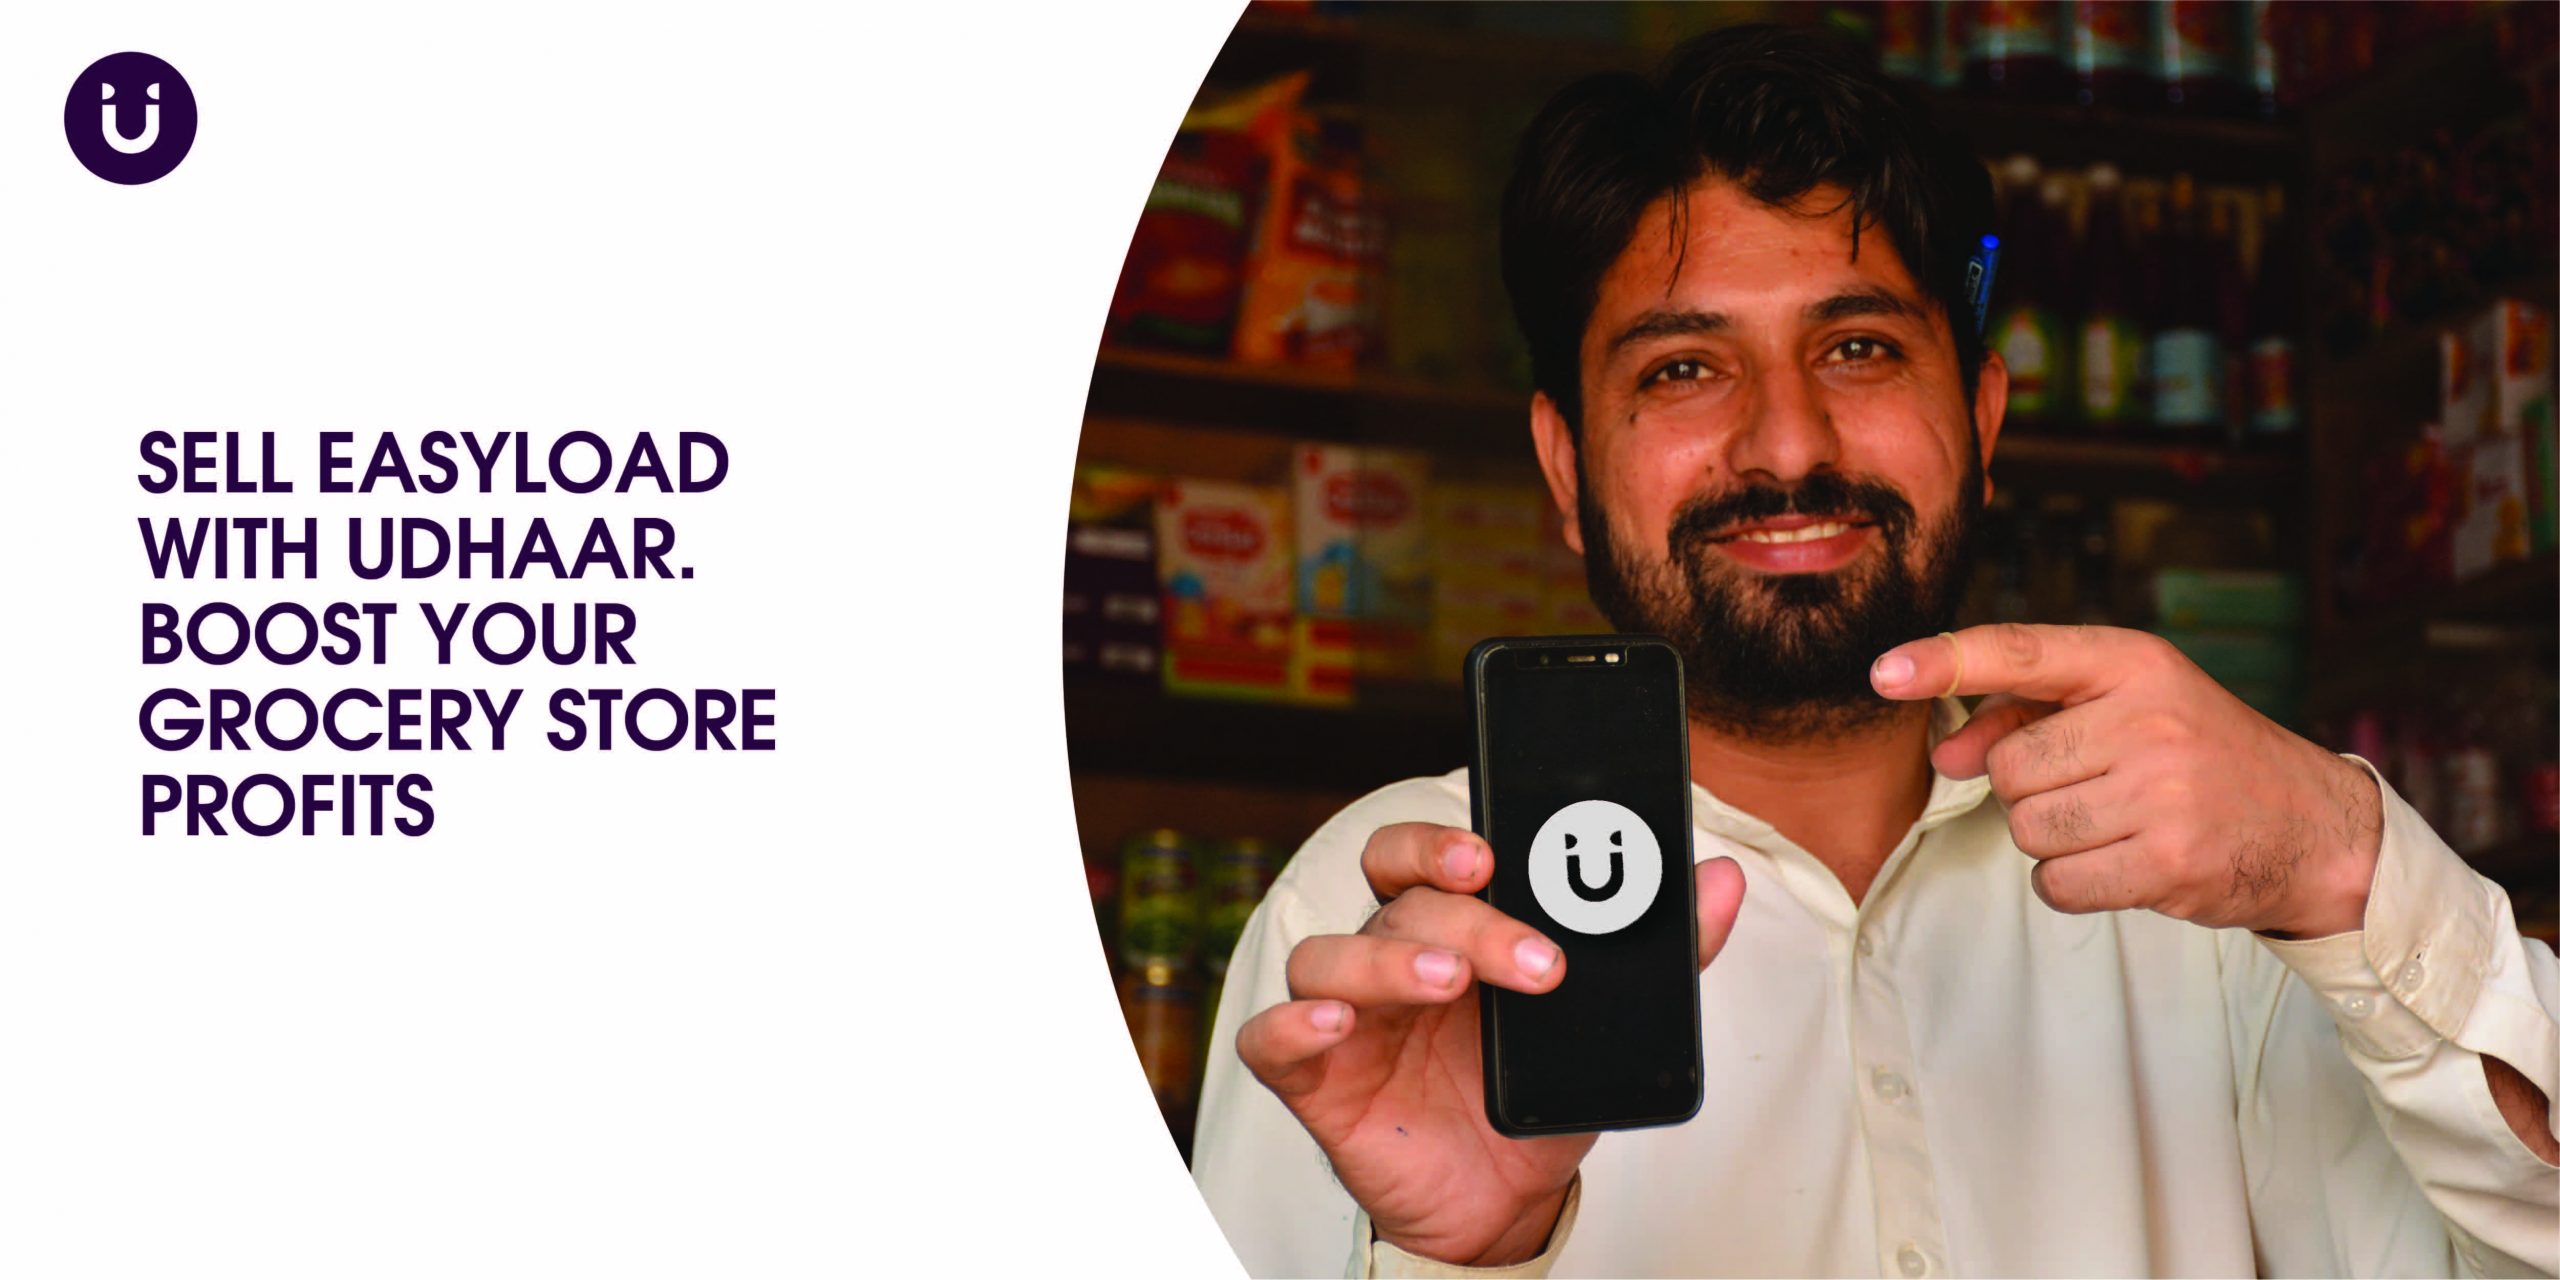 Sell Easyload with Udhaar. Boost your Grocery Store Profits